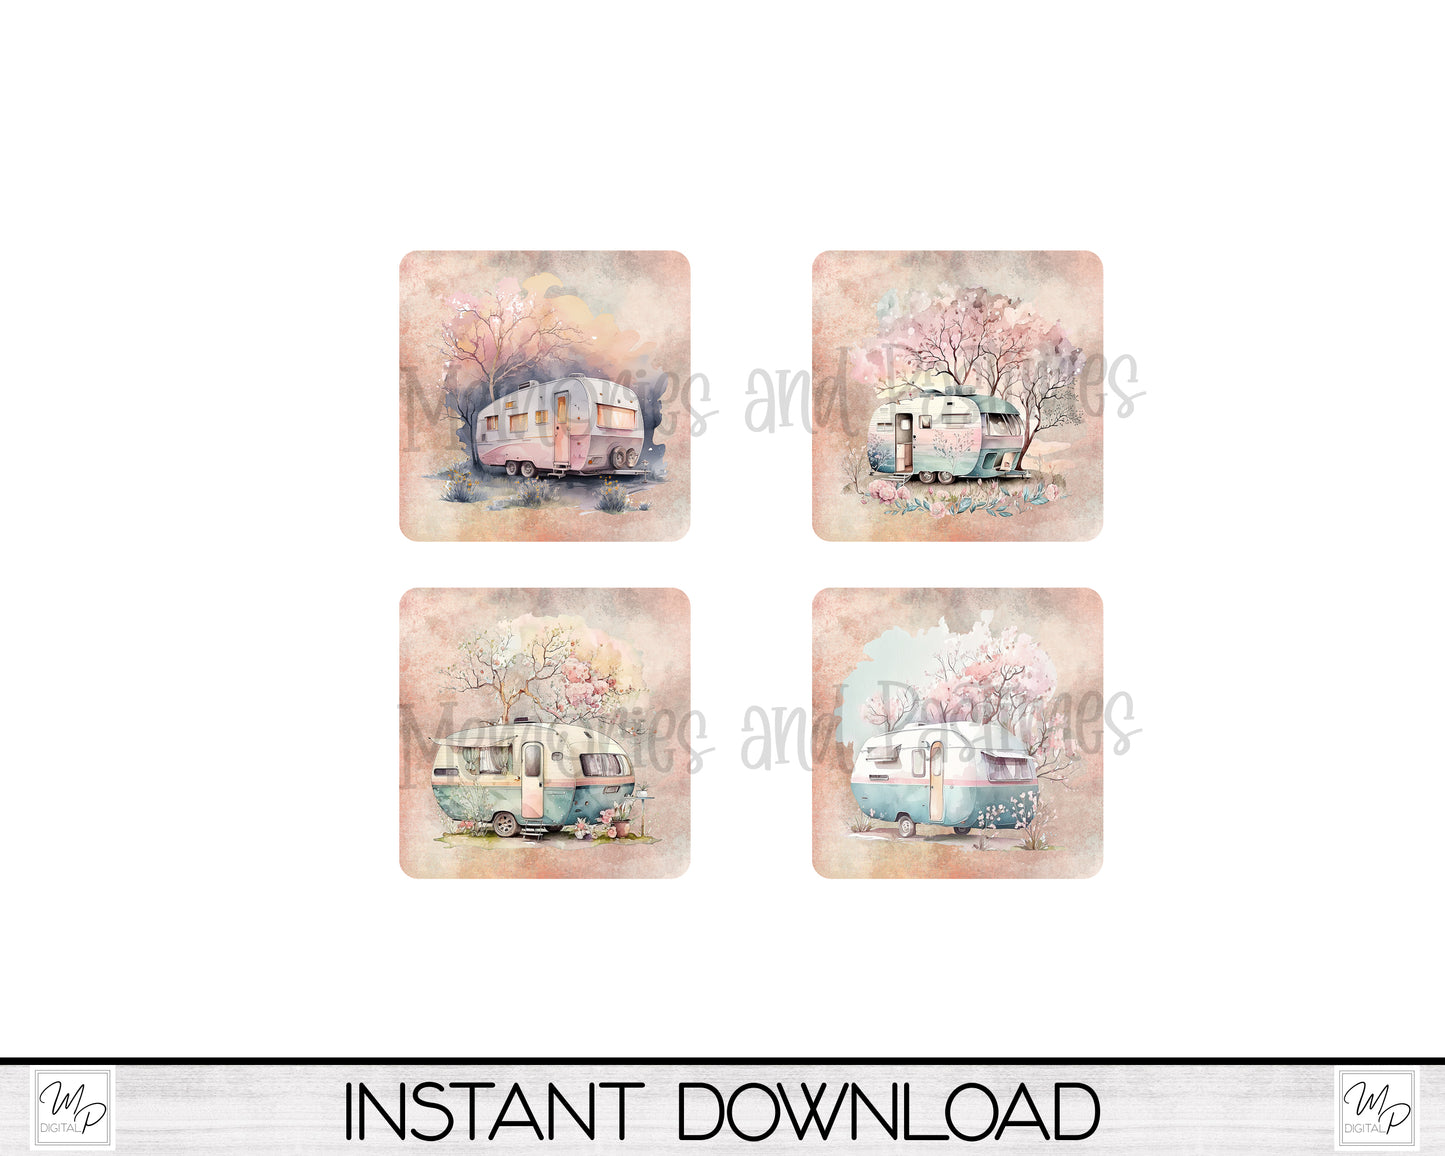 Set of 4 Camping Coaster Sublimation PNG Designs For Sublimation of Square and Round Coasters, Digital Download